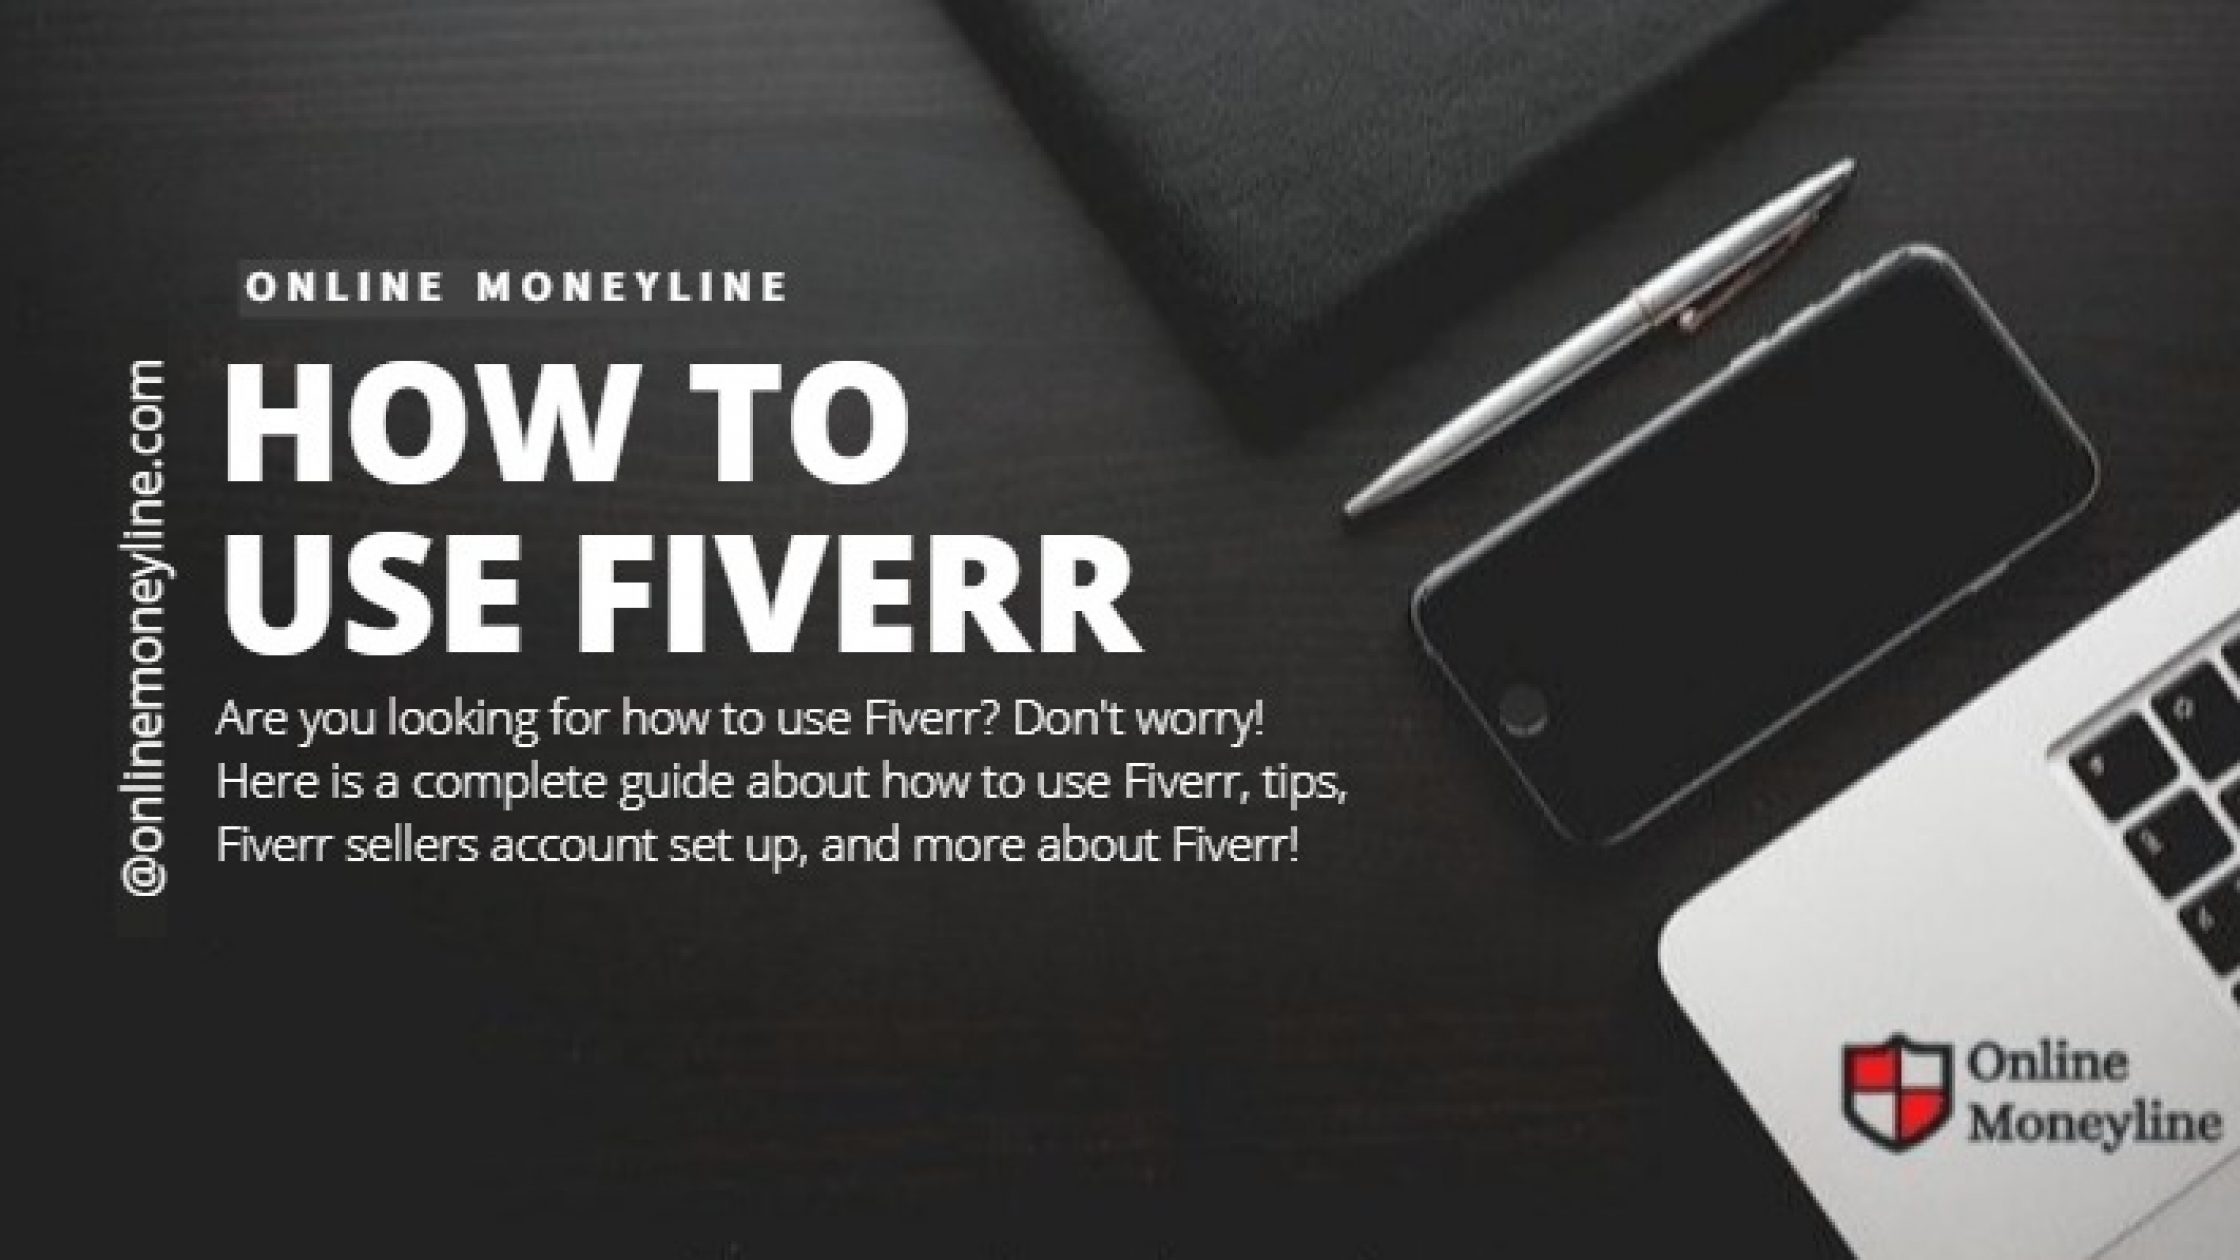 How to use Fiverr